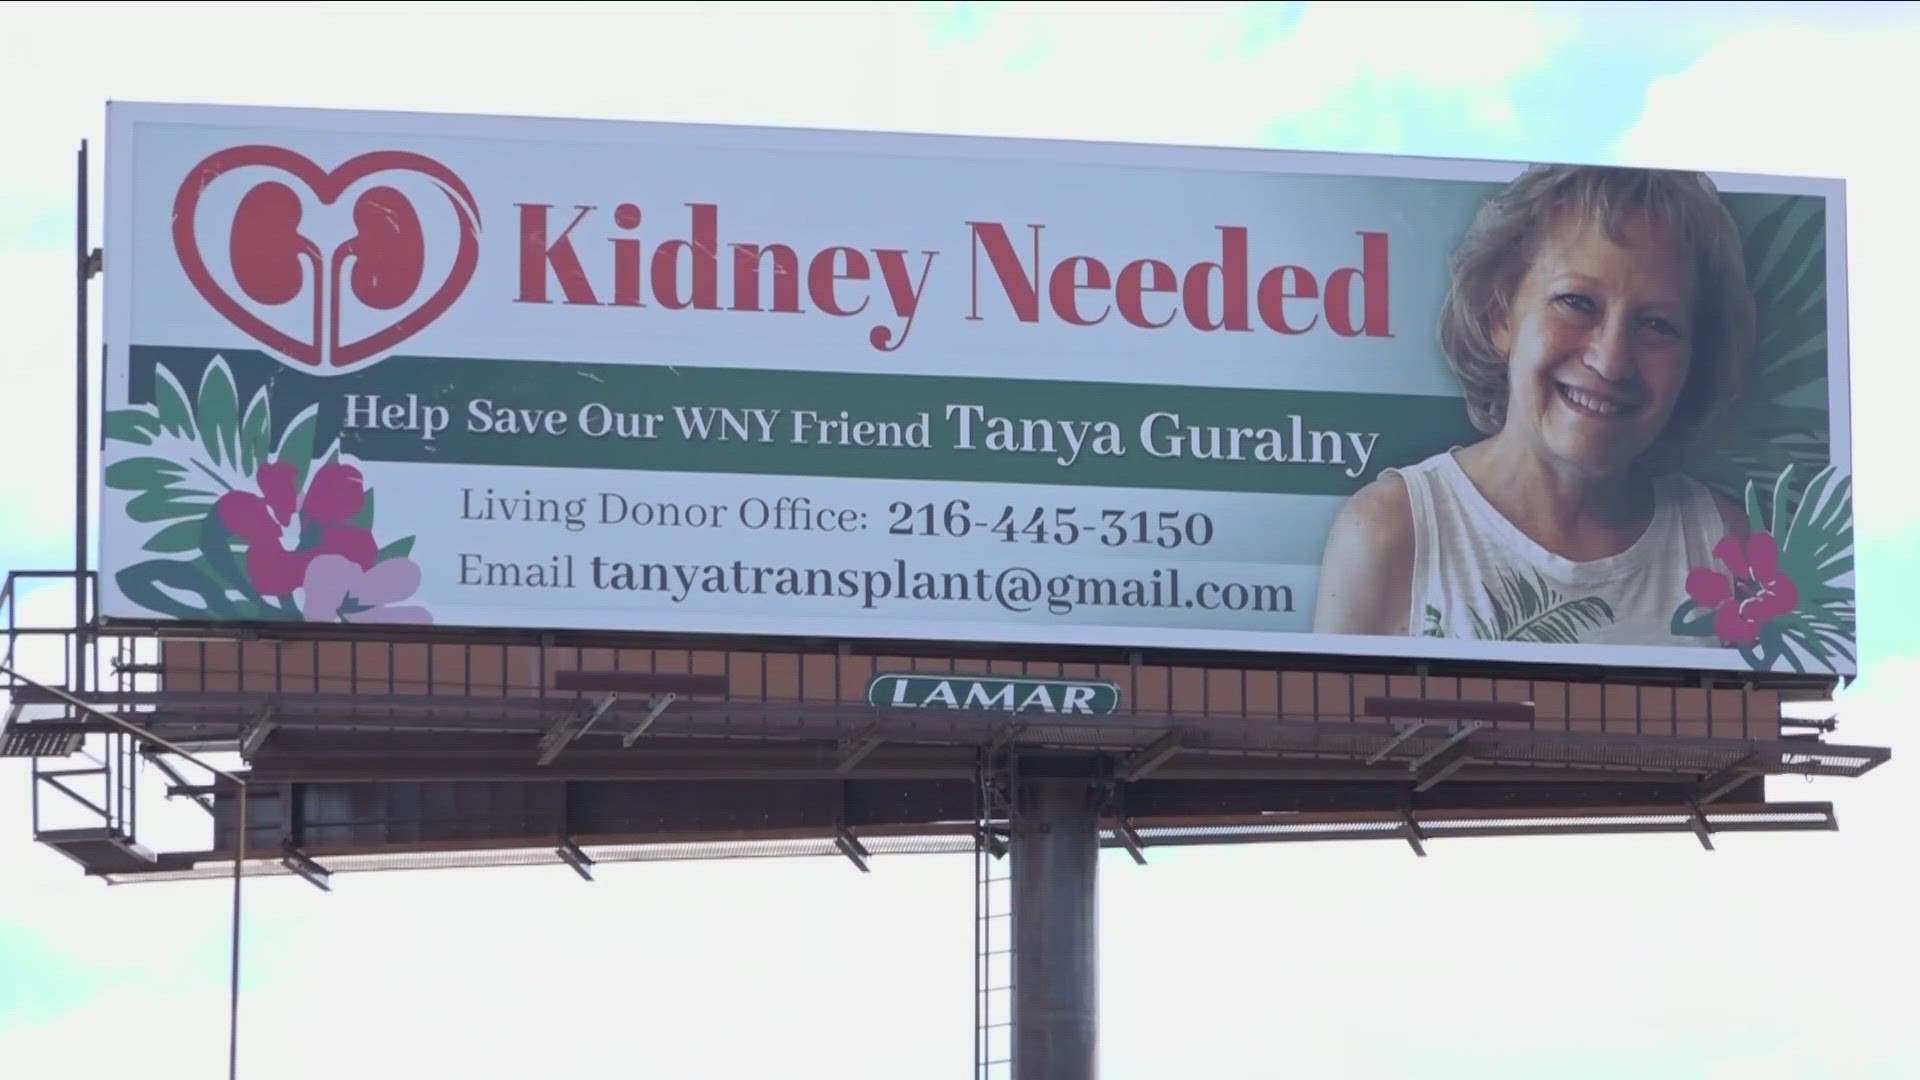 OUR DANIELLE CHURCH INTRODUCED US TO A WOMAN FROM TONAWANDA... WHO USED A BILLBOARD IN AN ATTEMPT TO FIND A KIDNEY DONOR.